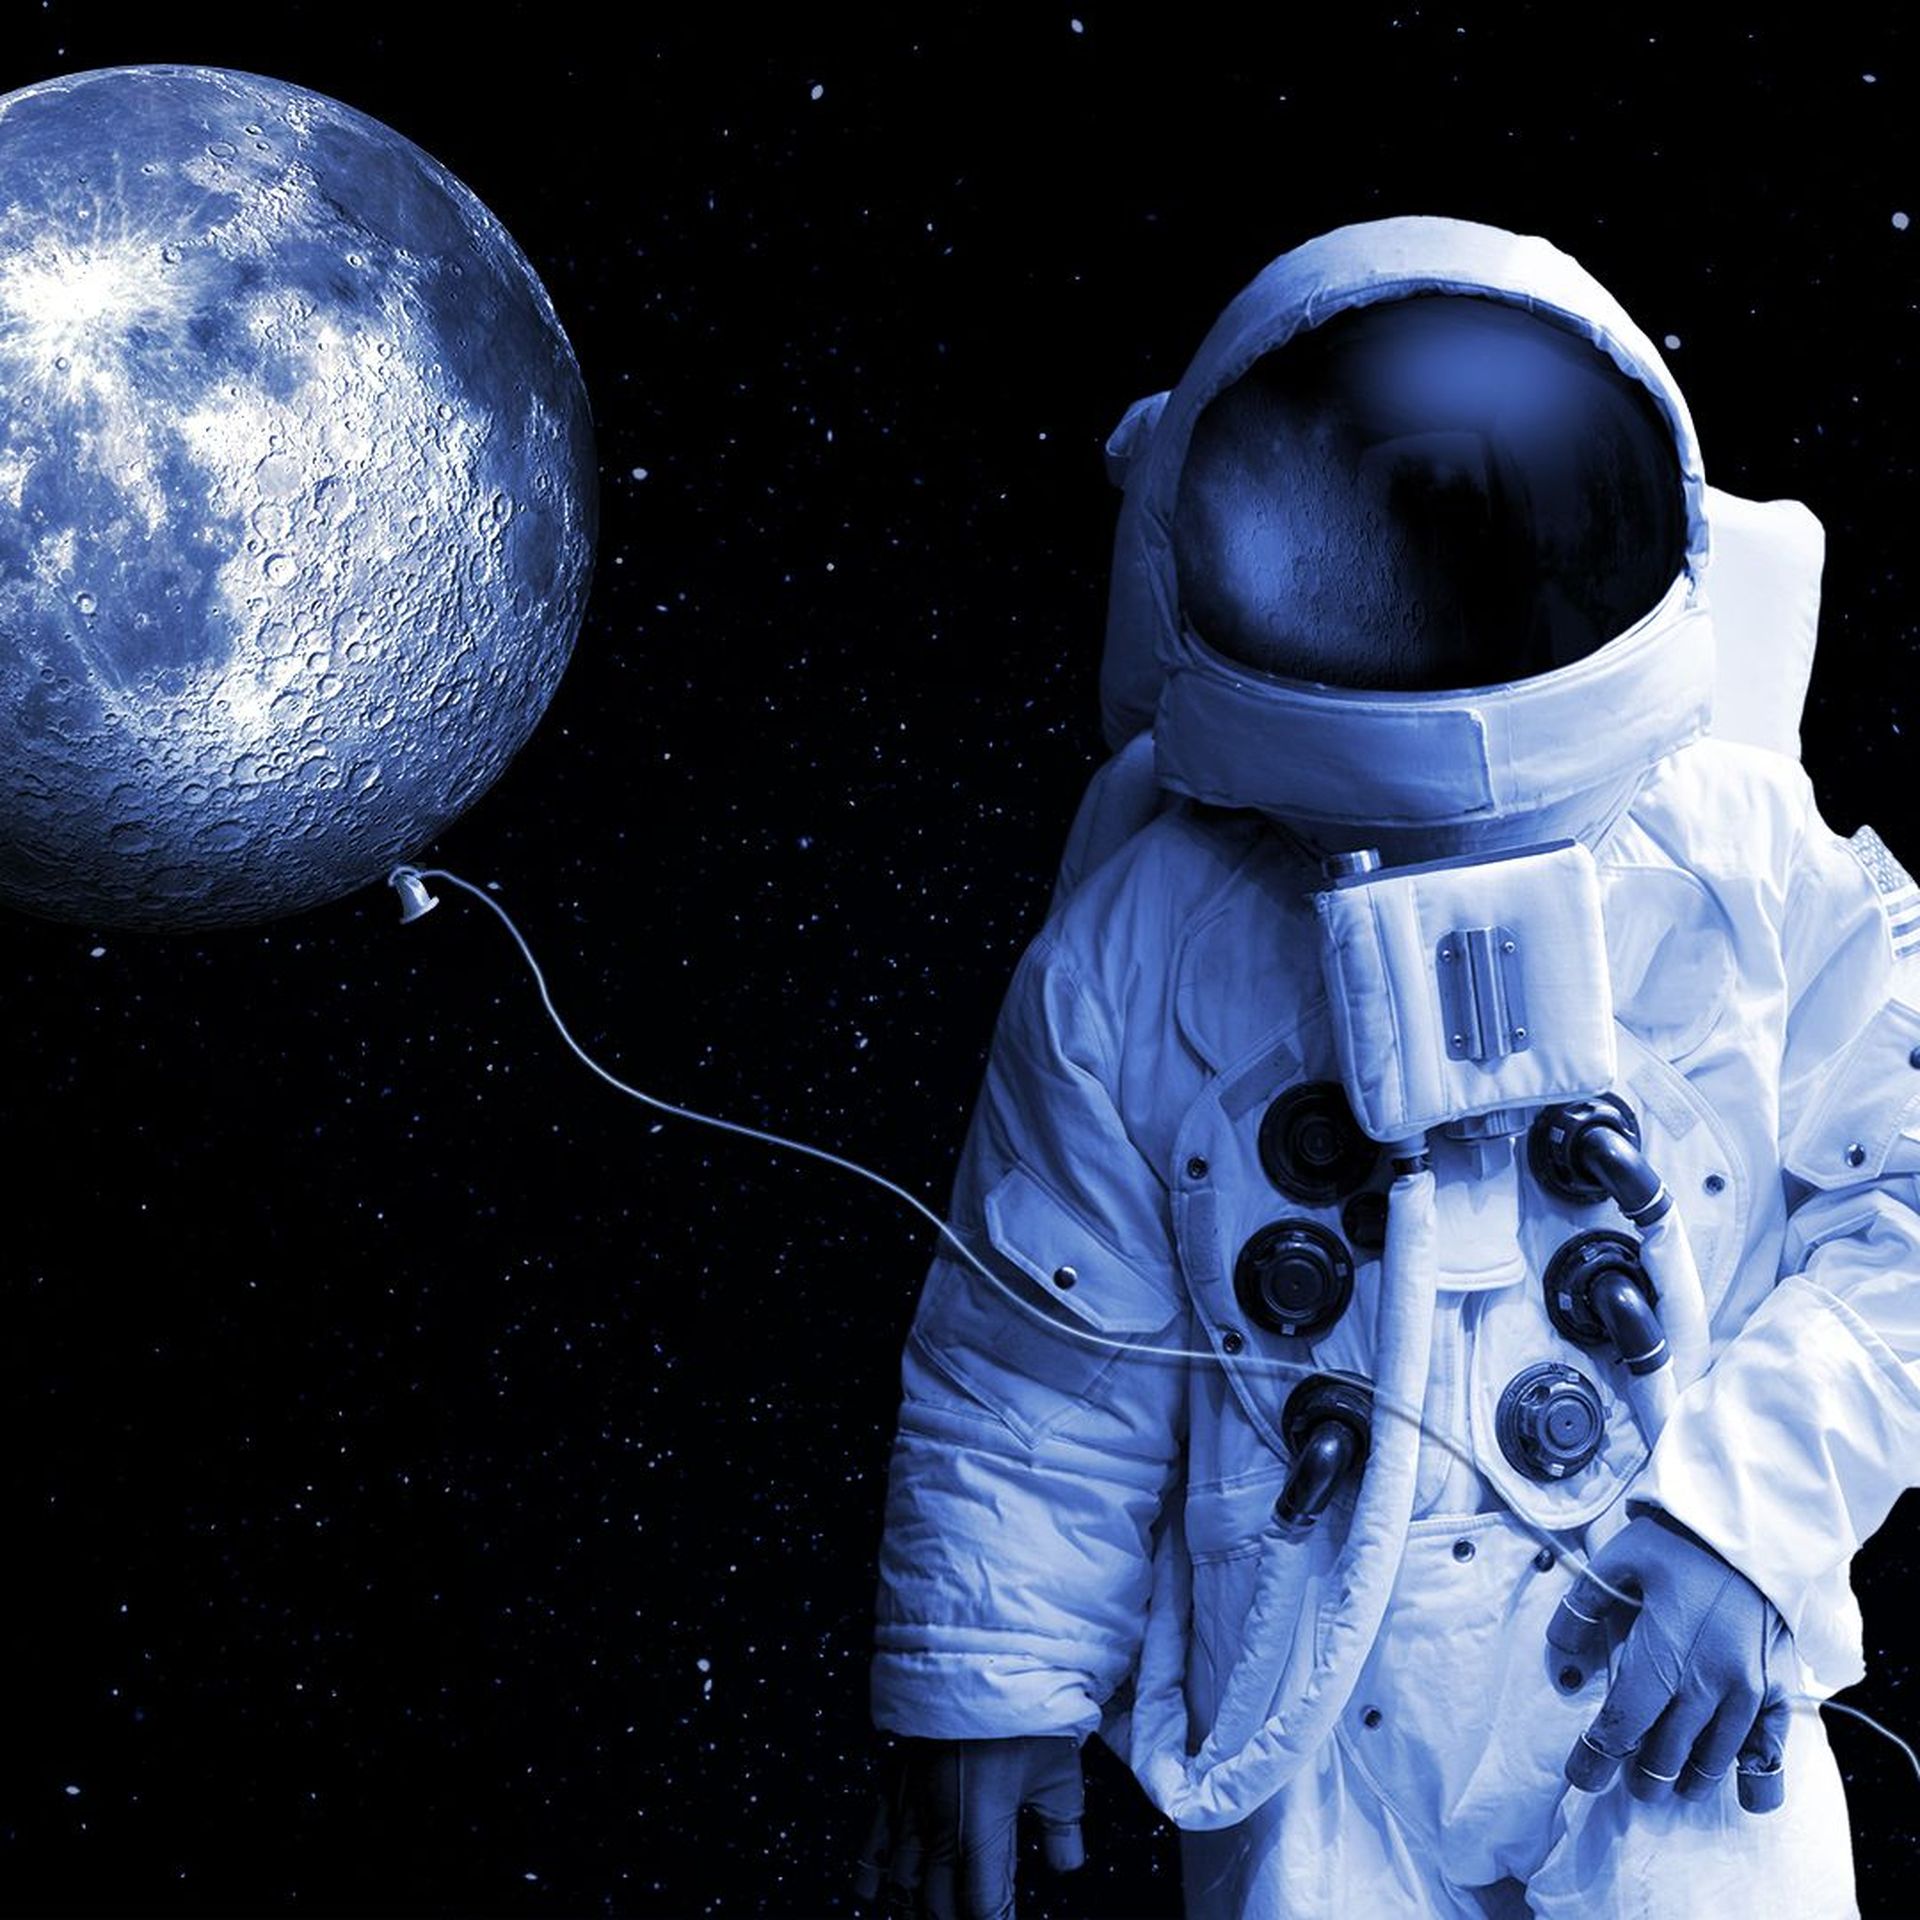 Illustration of an astronaut holding a balloon made of the moon.